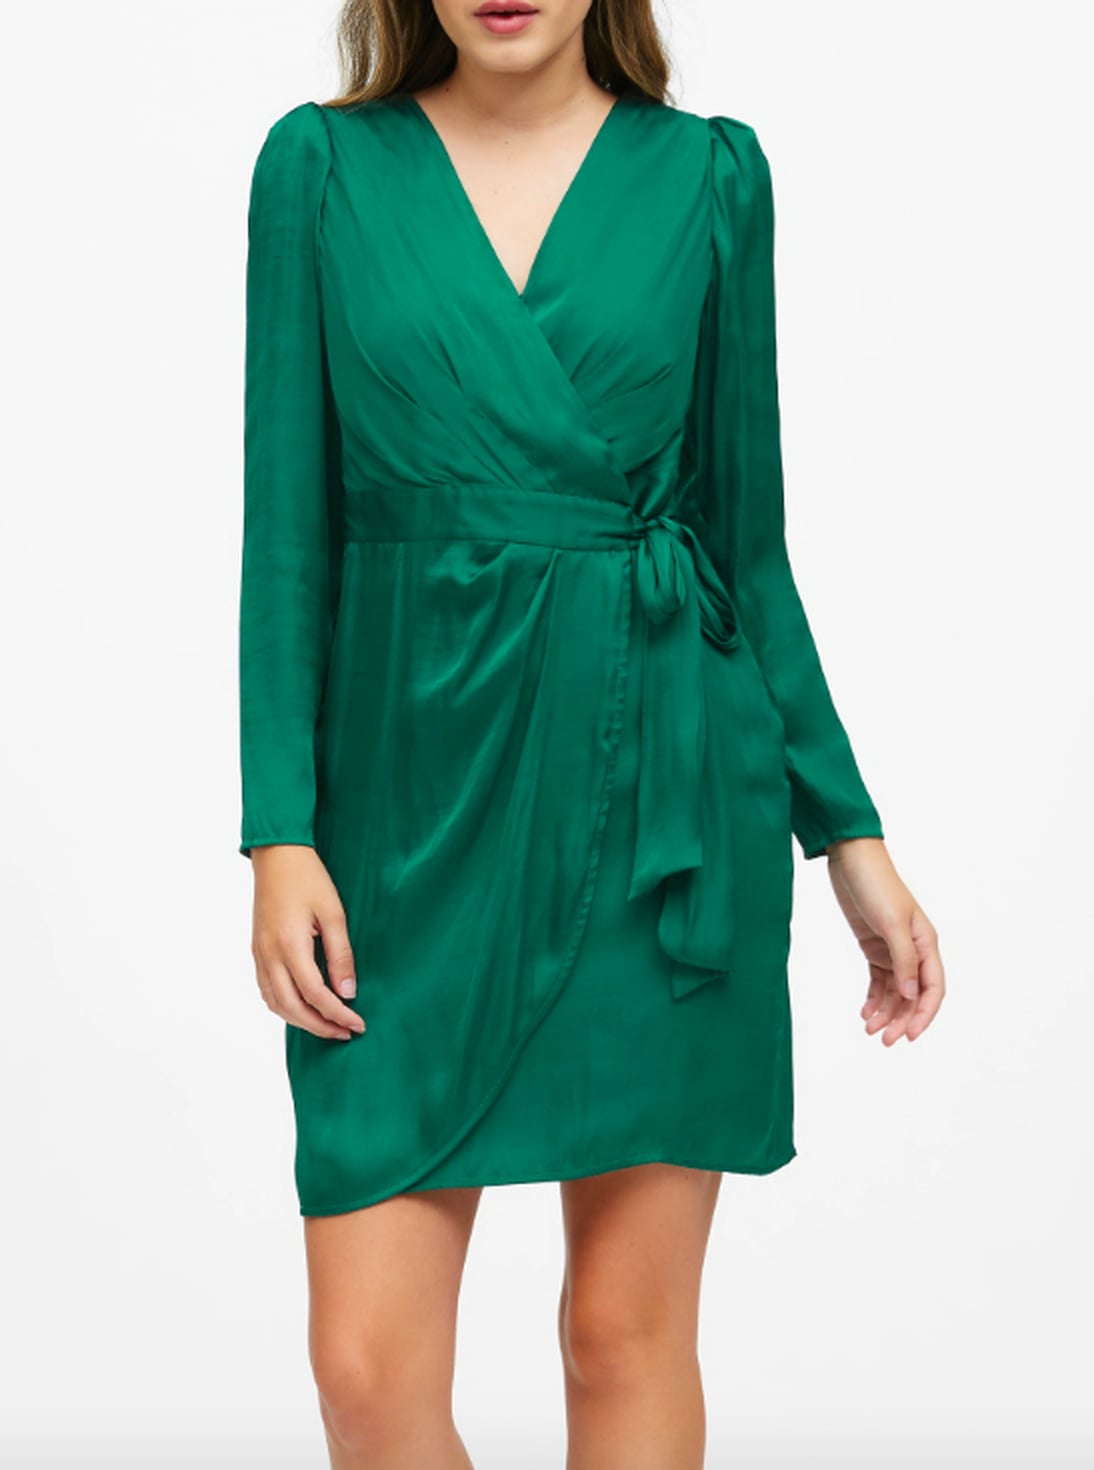 Best Party Dresses From Banana Republic | POPSUGAR Fashion